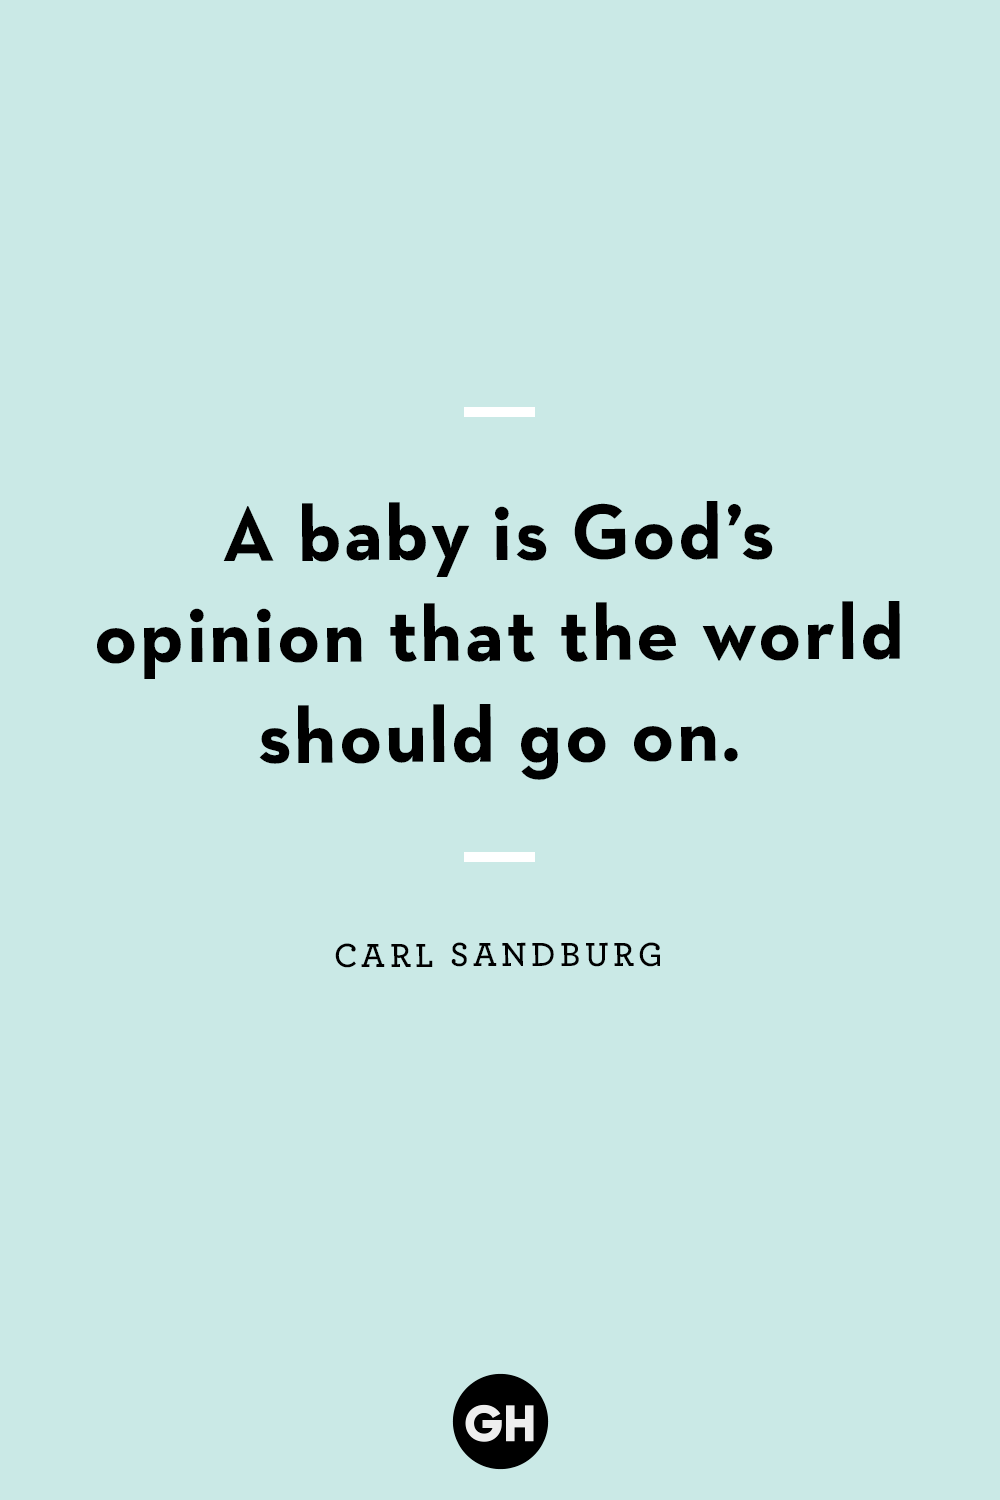 cute quotes about god and life